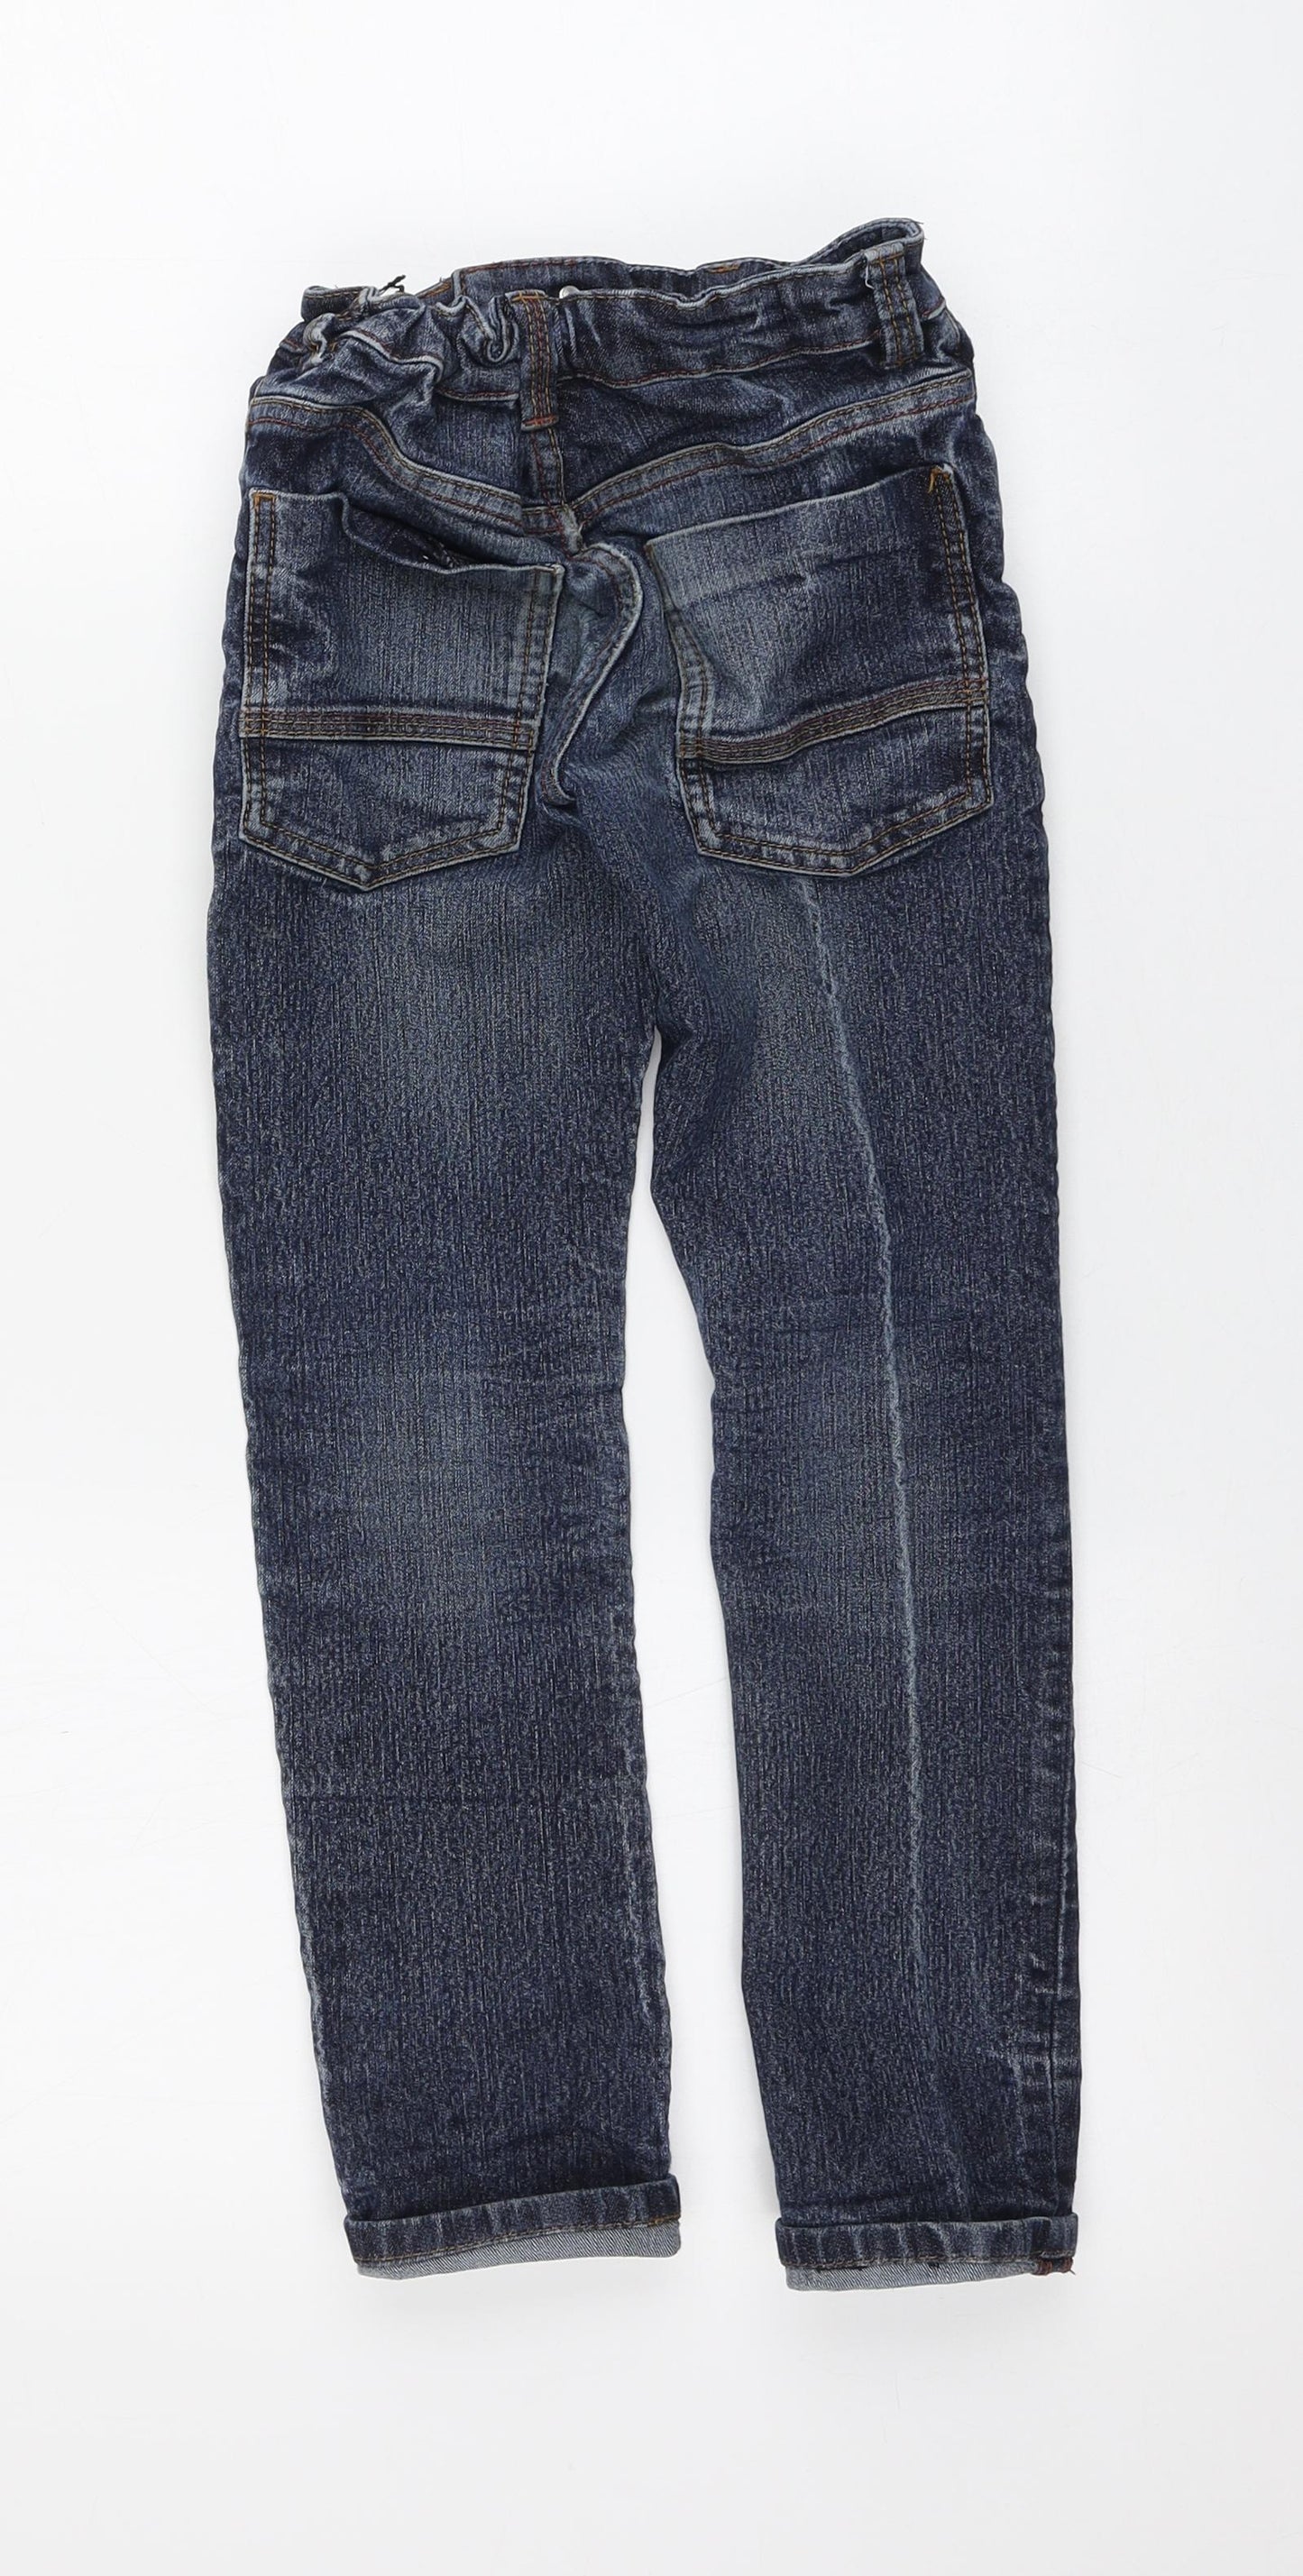 NEXT Girls Blue  Cotton Skinny Jeans Size 7 Years L20 in Regular